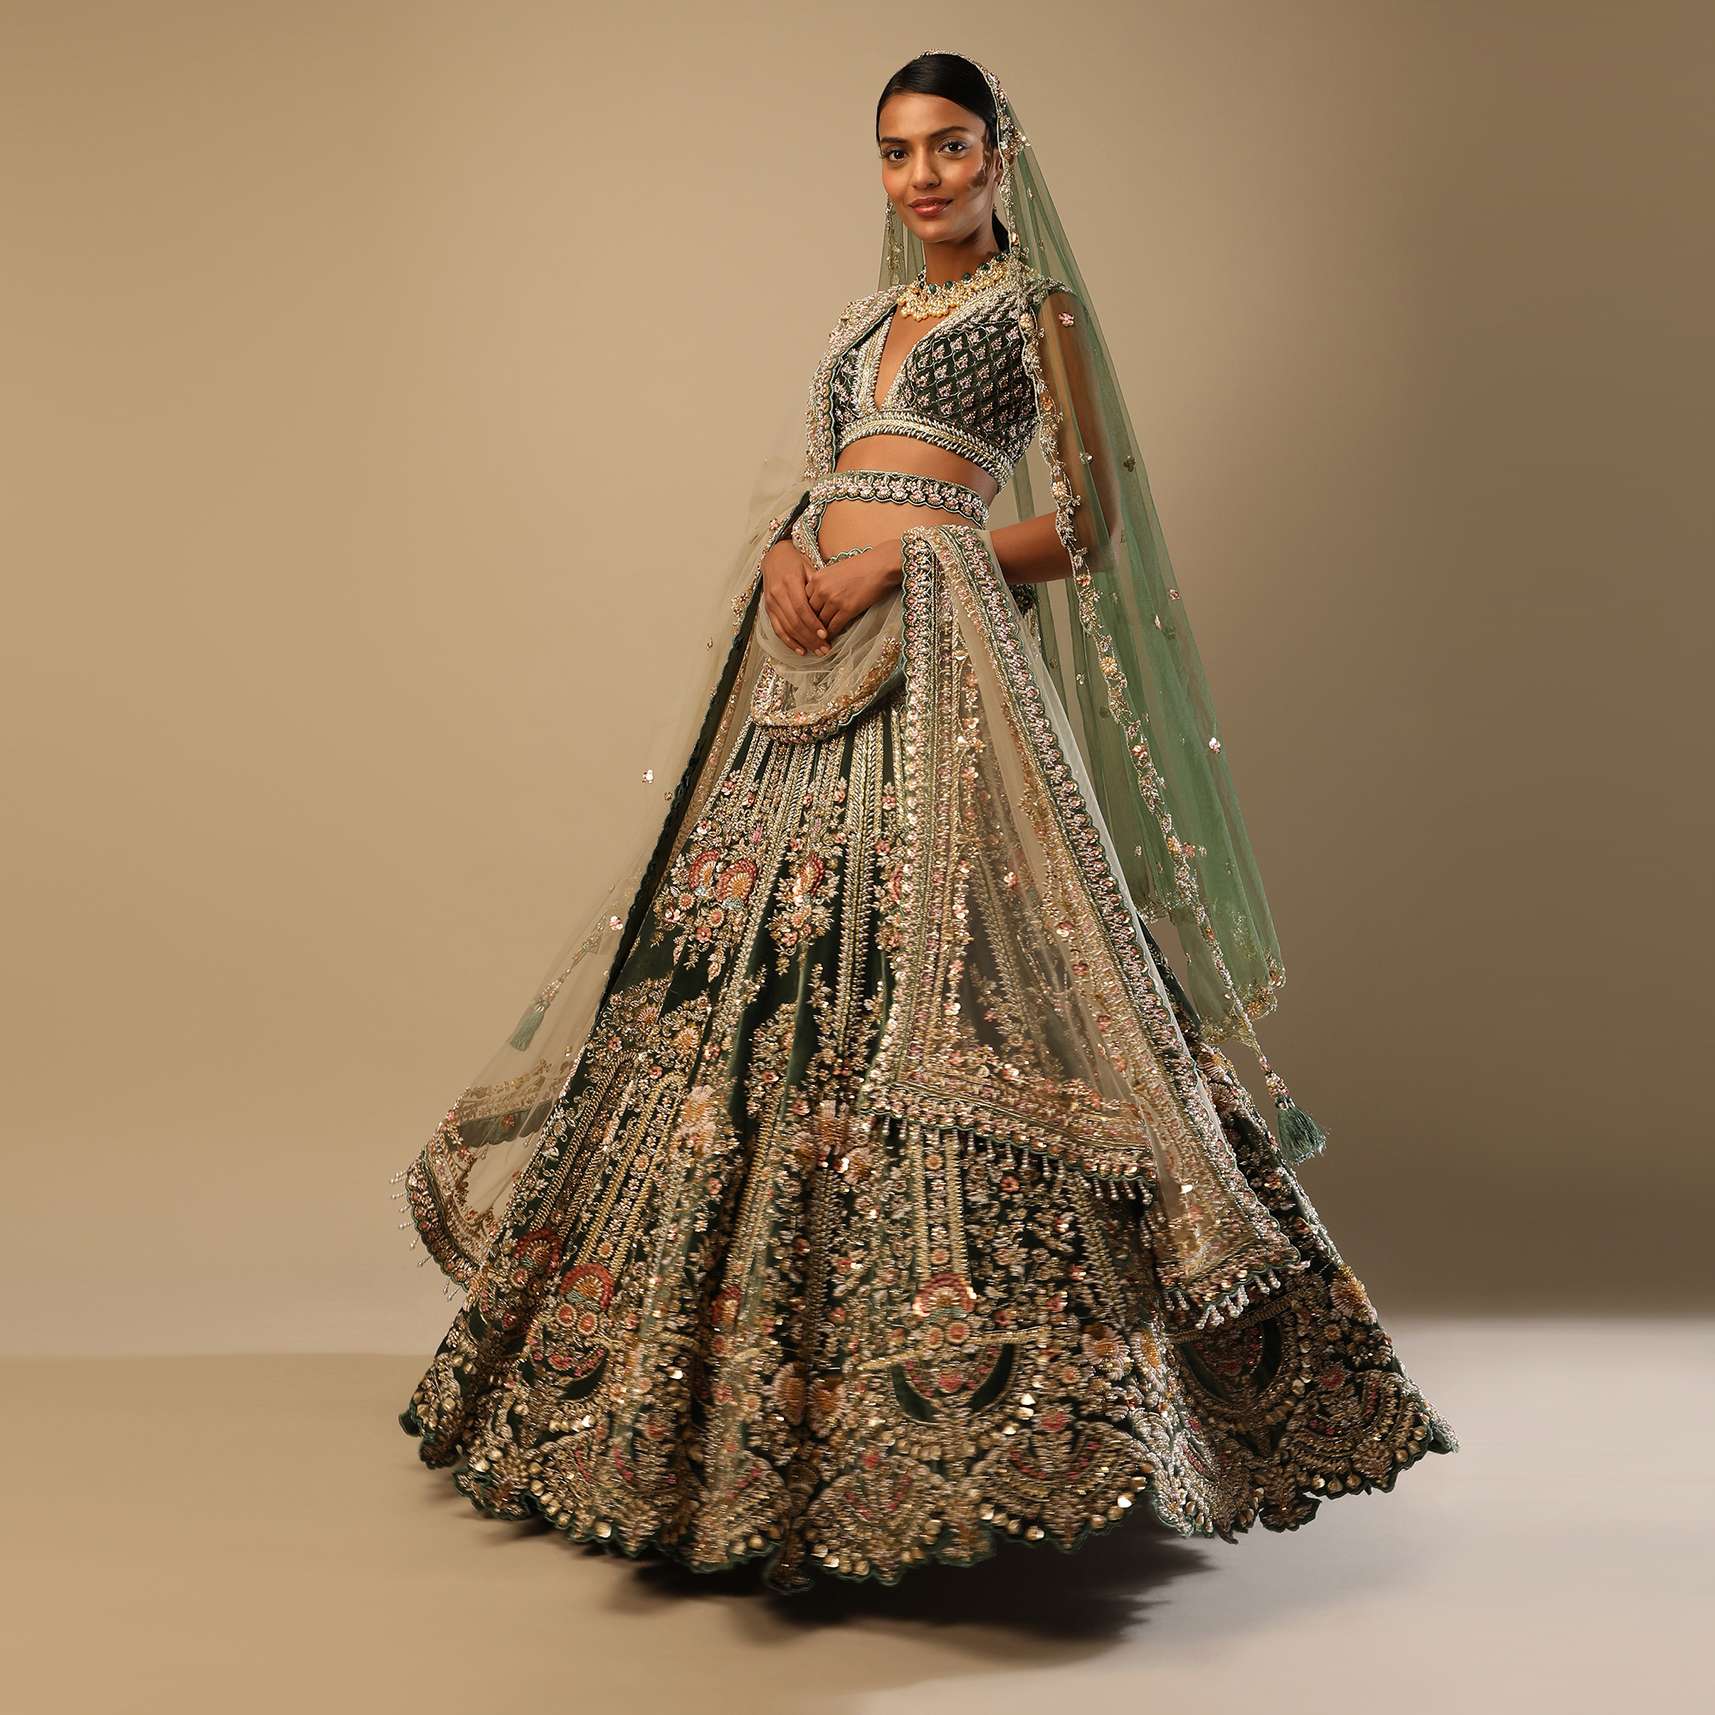 Palace Green Lehenga Choli In Velvet With Multi Colored Hand Embroidered Heritage Kalis With Hints Of Flowers